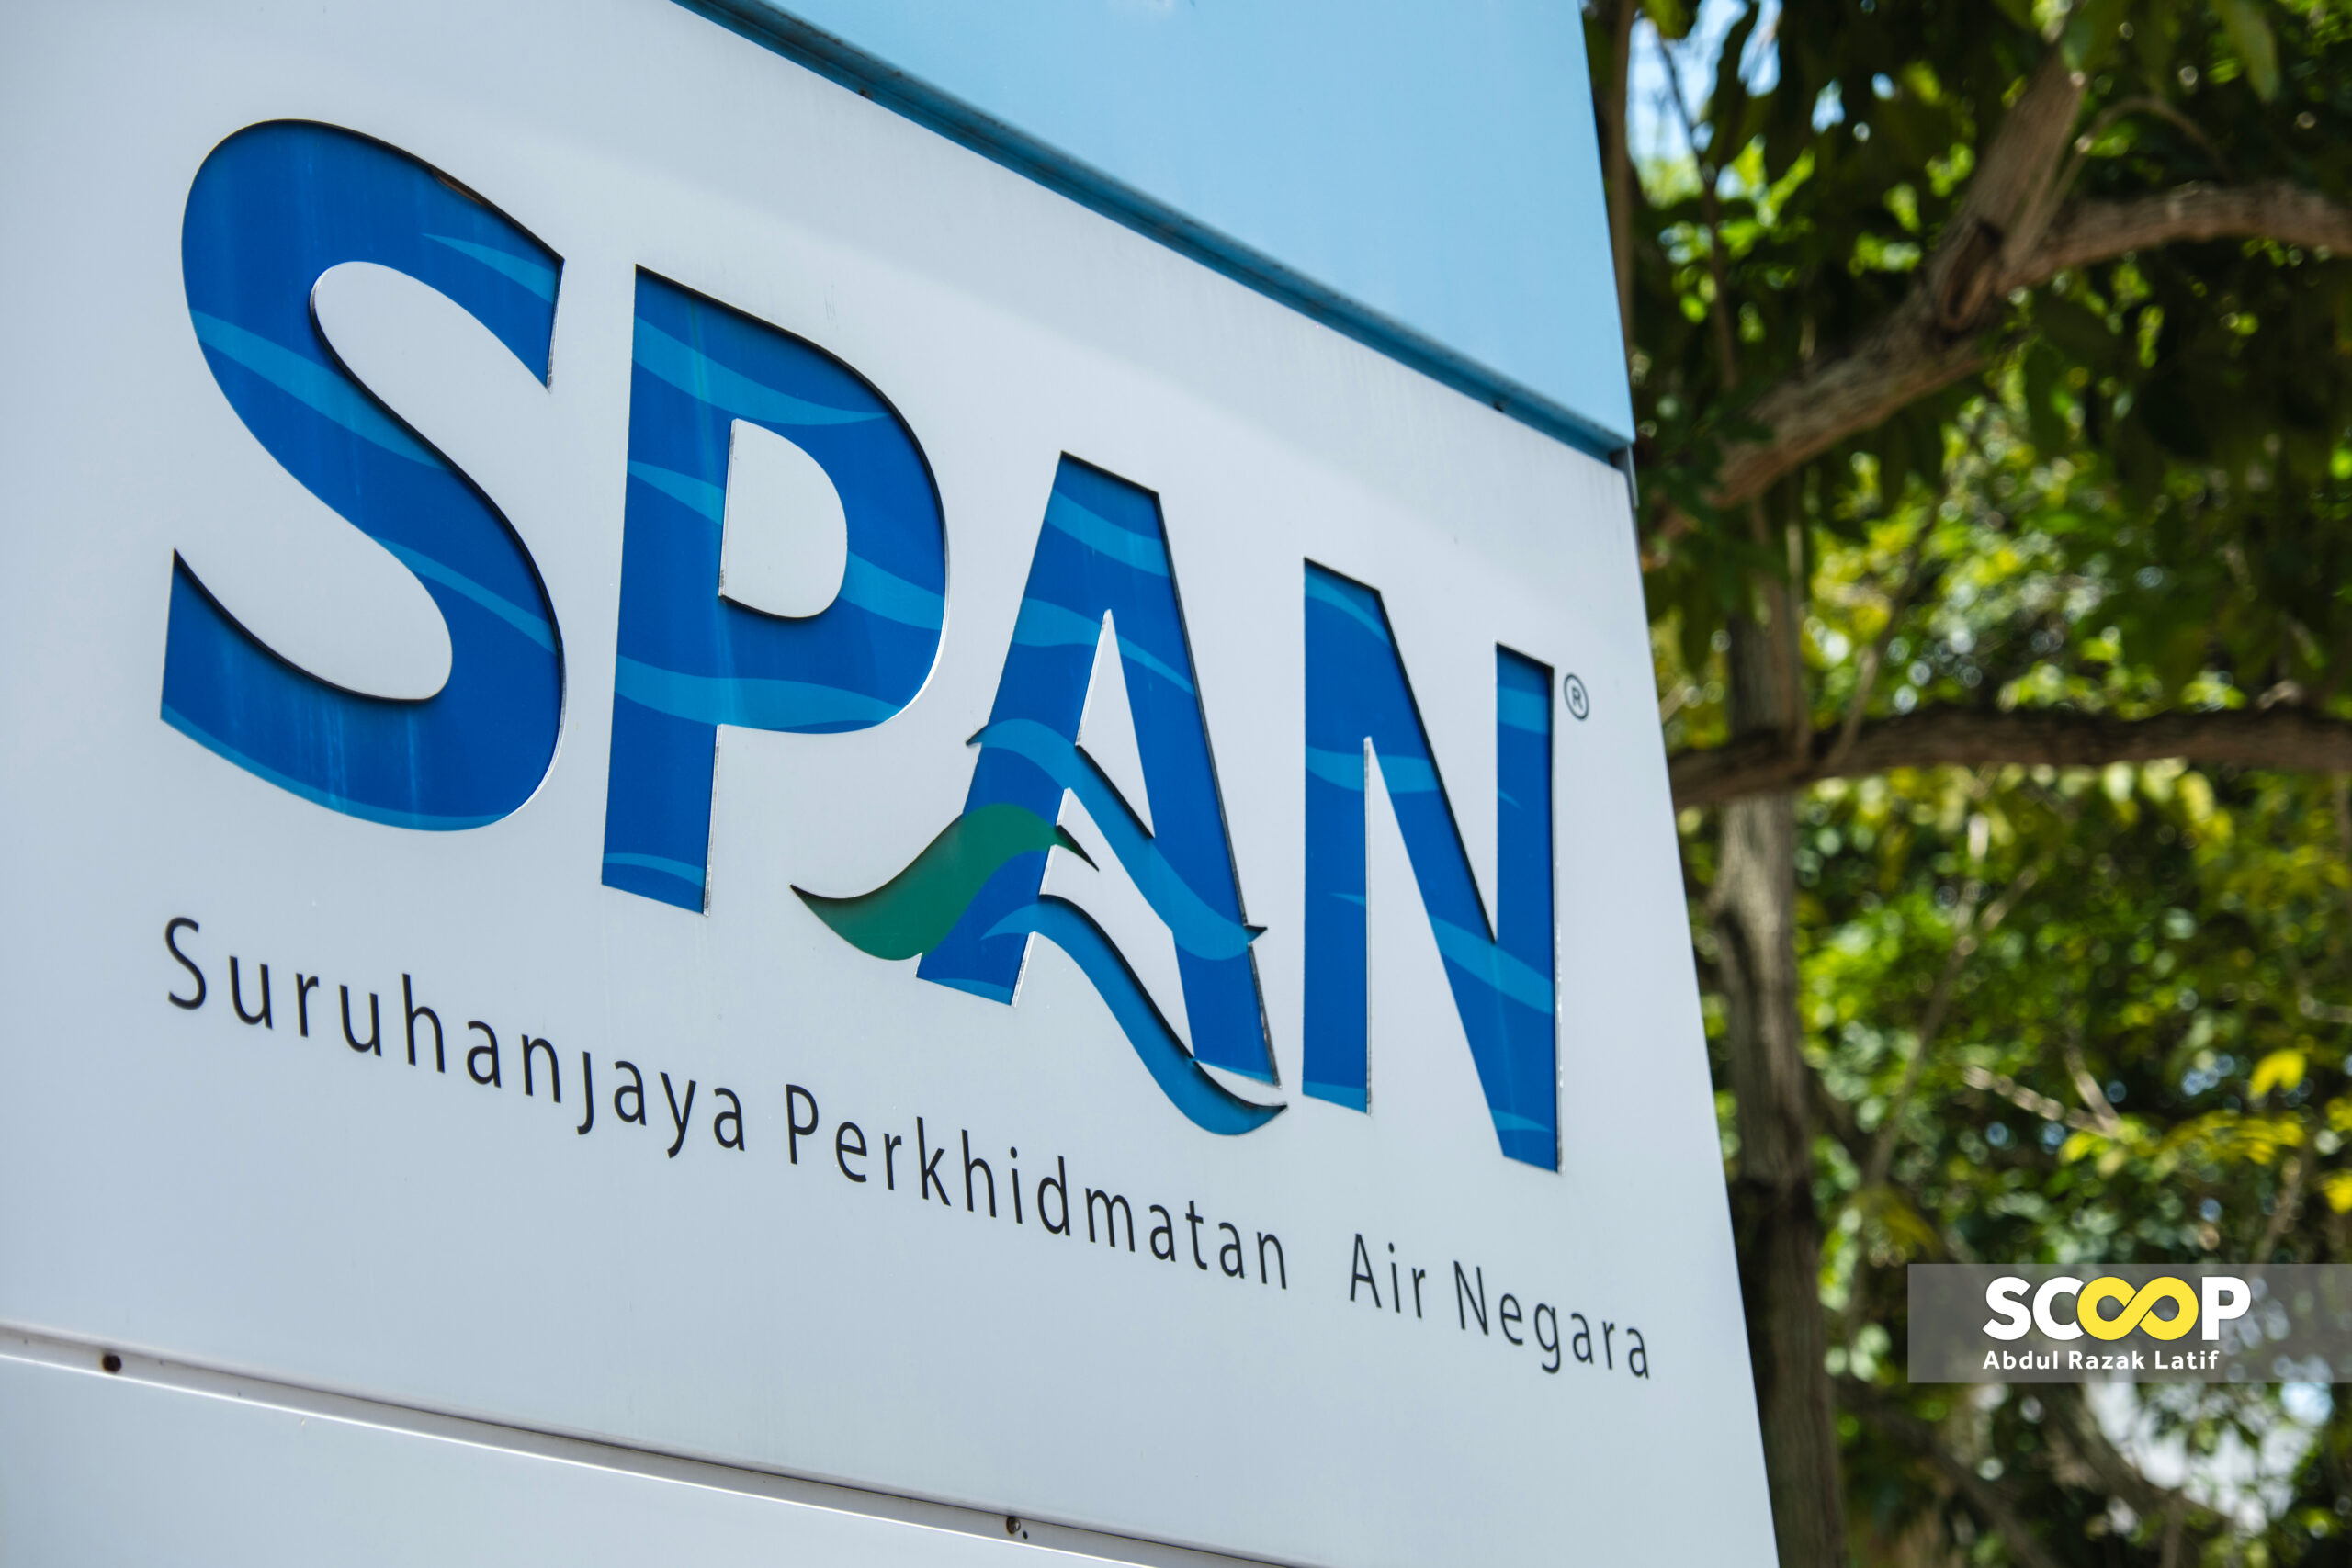 Water concessionaires risk losing licences with subpar performance, SPAN warns